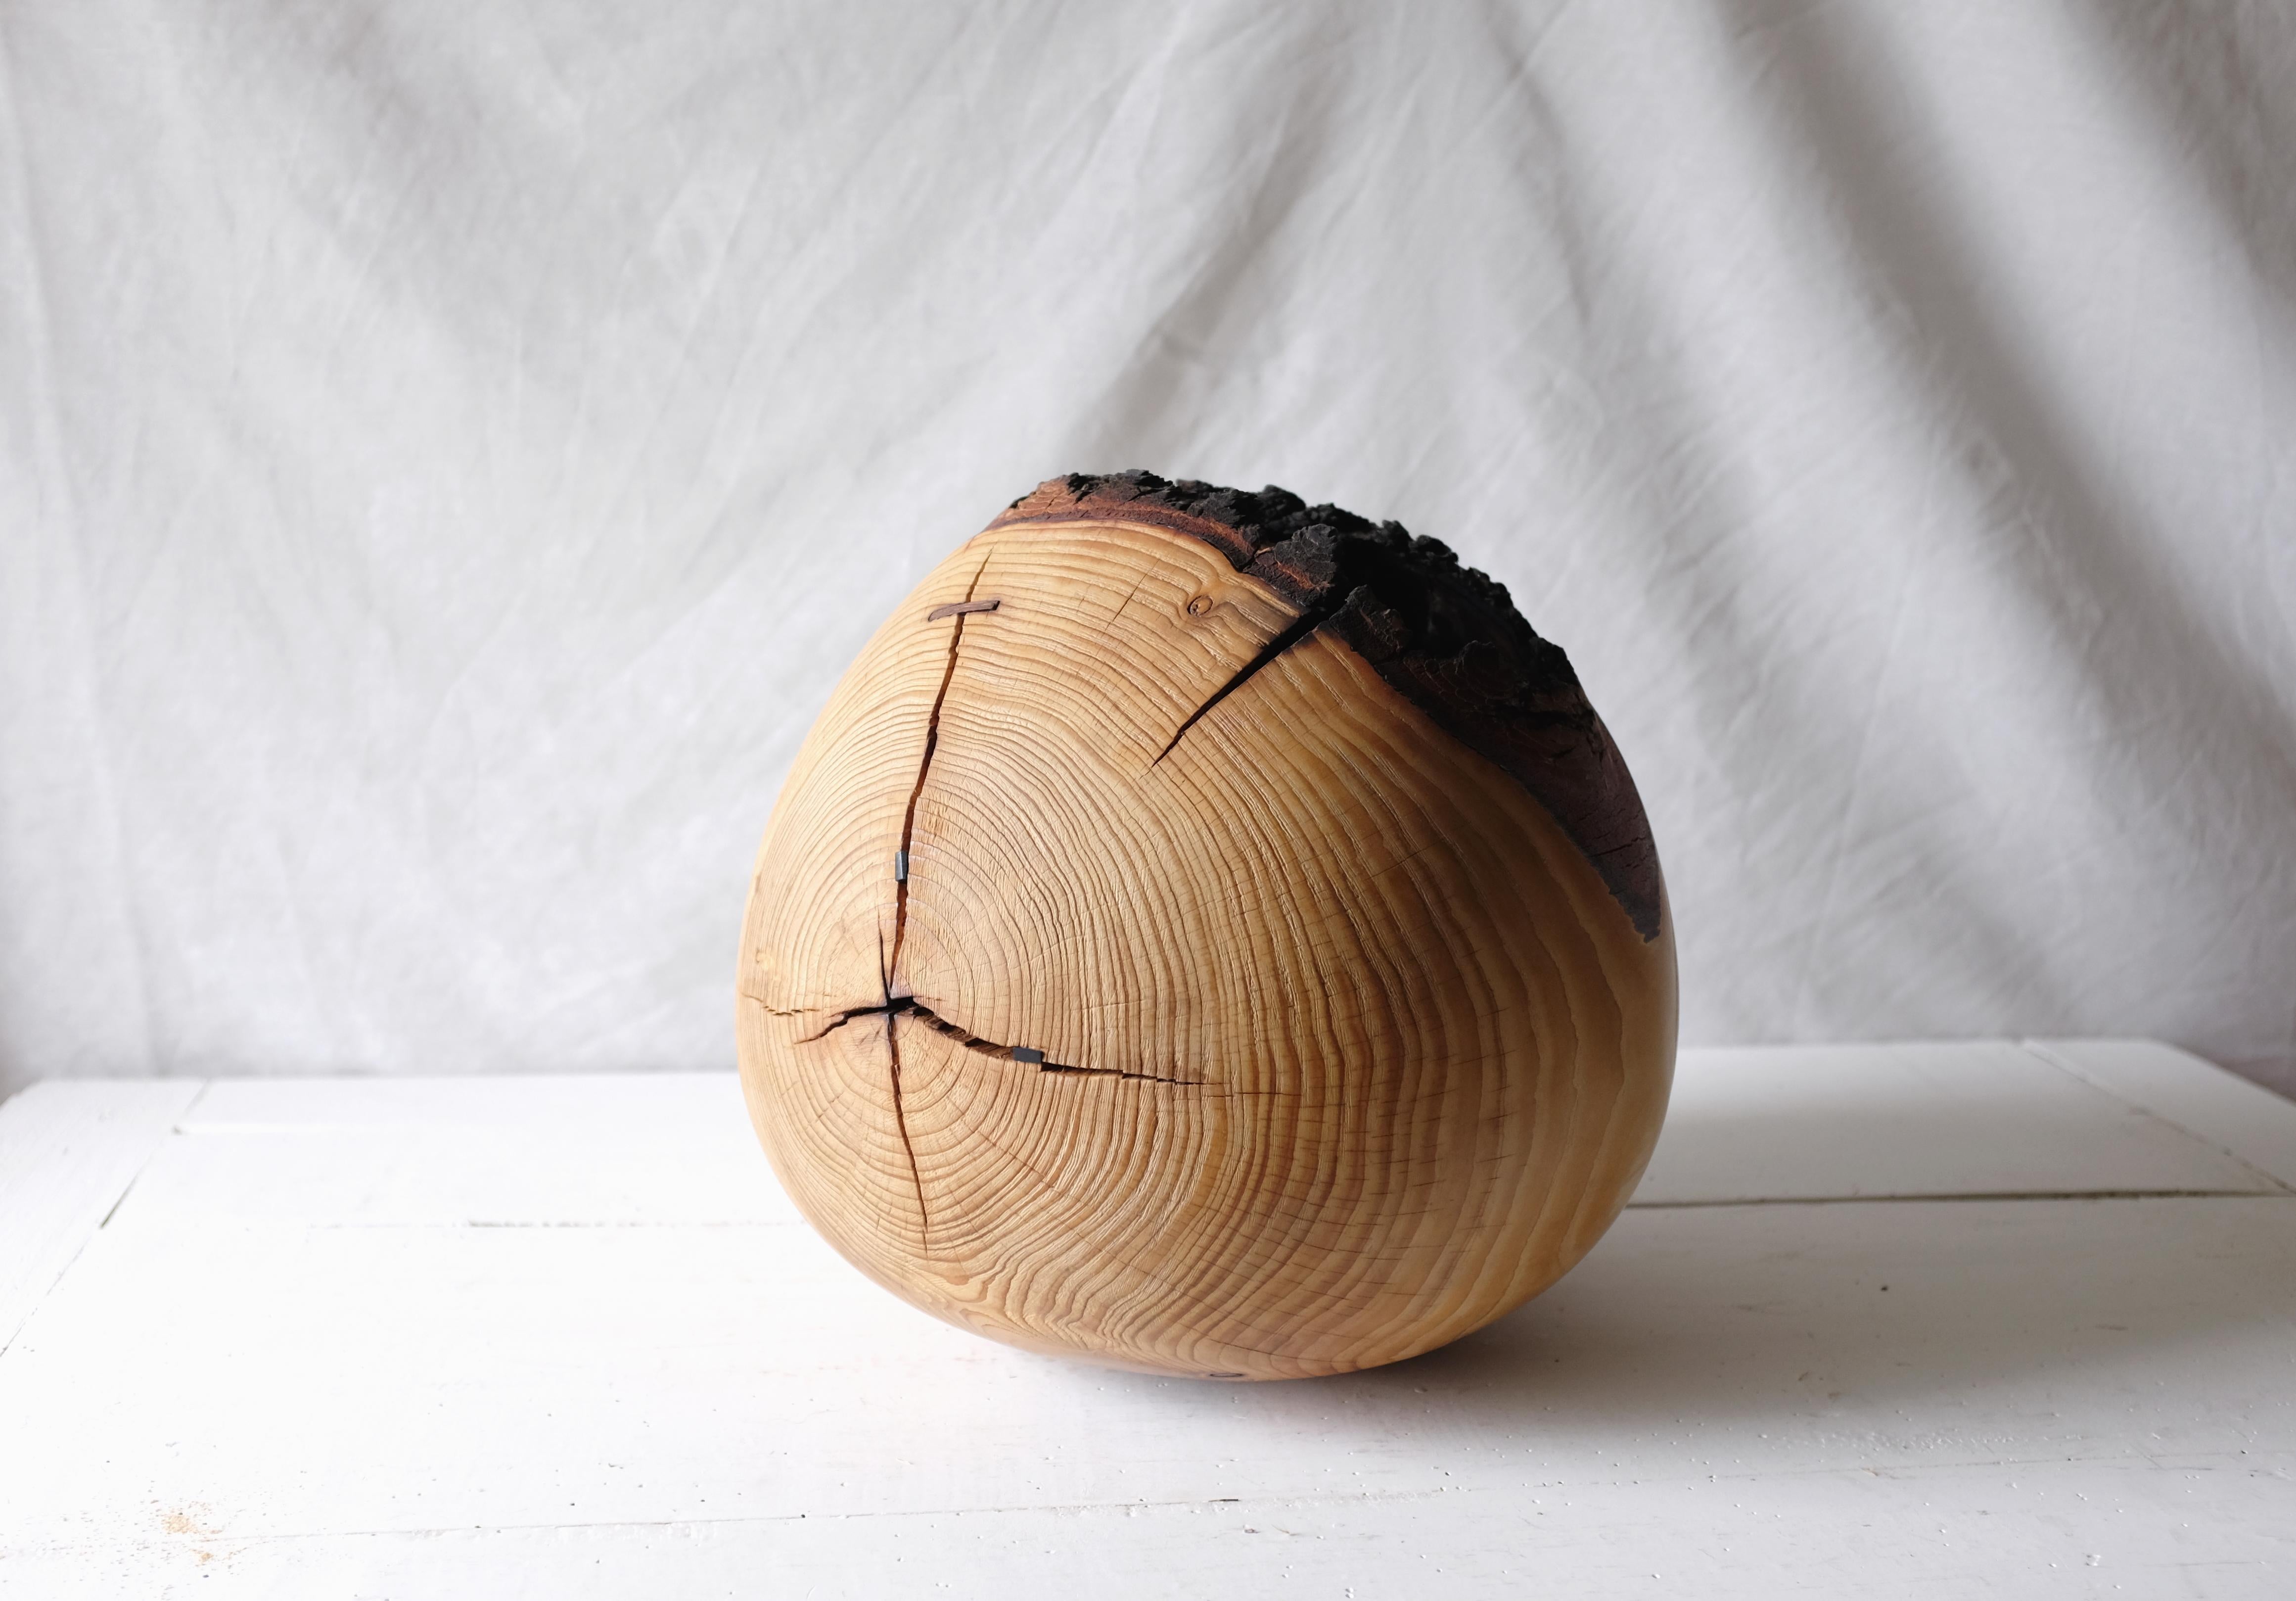 Qercus Rubra #1 by Marco Bellini
Dimensions: 36 H x 36 W cm
Materials: Cedar 
 Fire, lime, wood ashes, beeswax

Marco was born in the middle of the rice fields of Vercelli, Italy, during the Years of Lead. 

He studied philosophy and a bit of